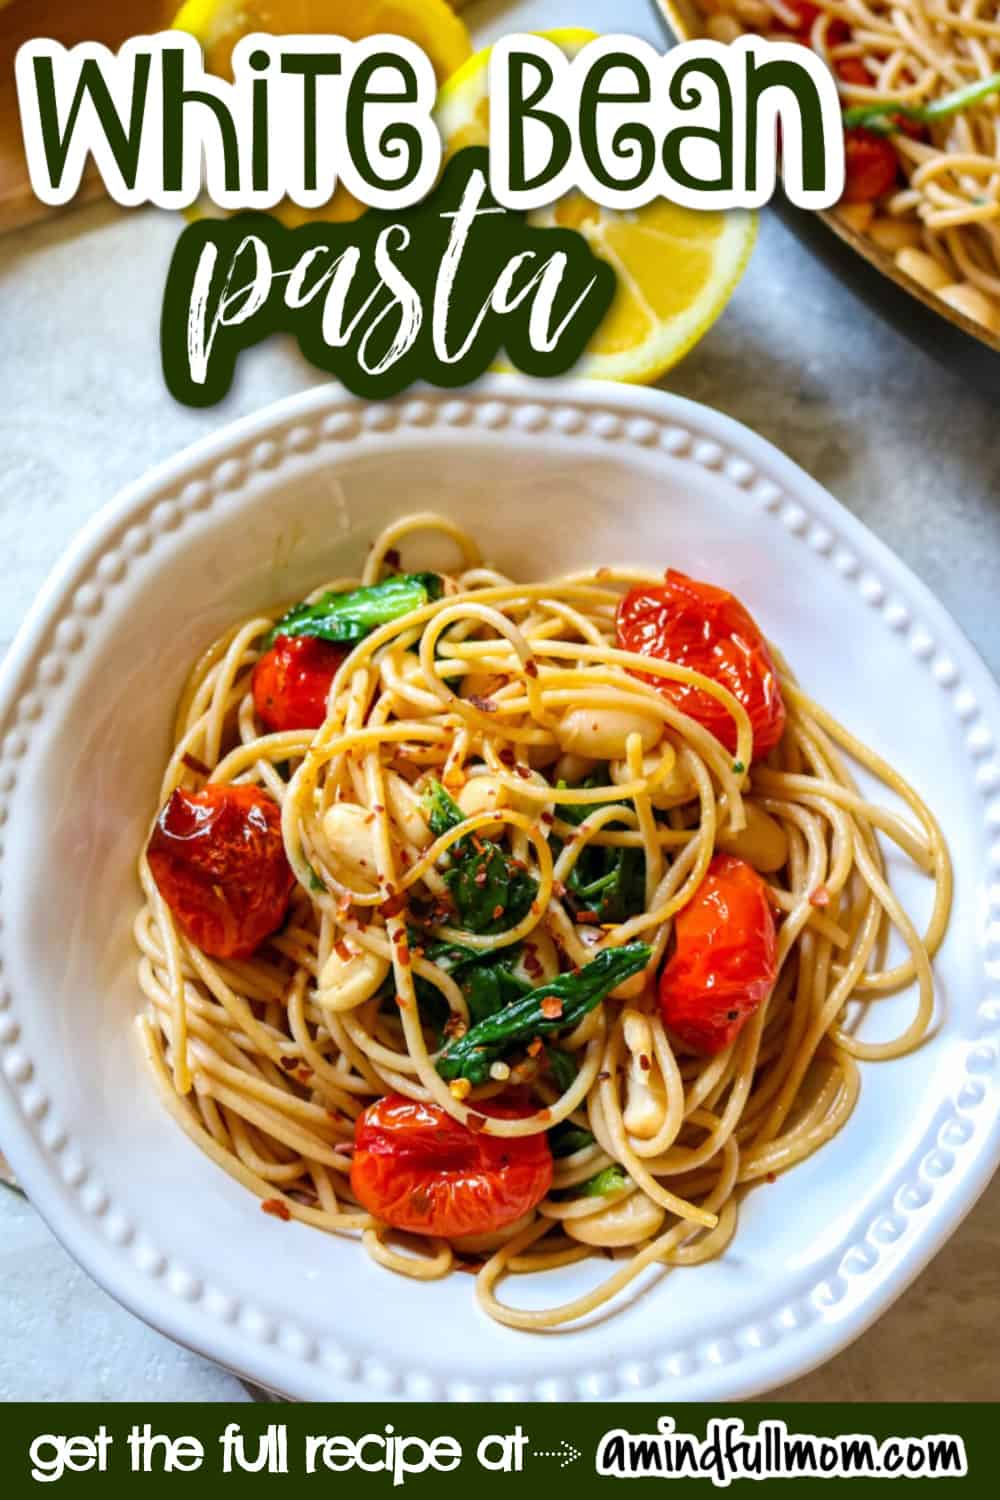 Made with seasoned white beans, blistered tomatoes, and fresh spinach, Tuscan White Bean Pasta is a simple, yet flavorful, pasta recipe that comes together in under 30 minutes.